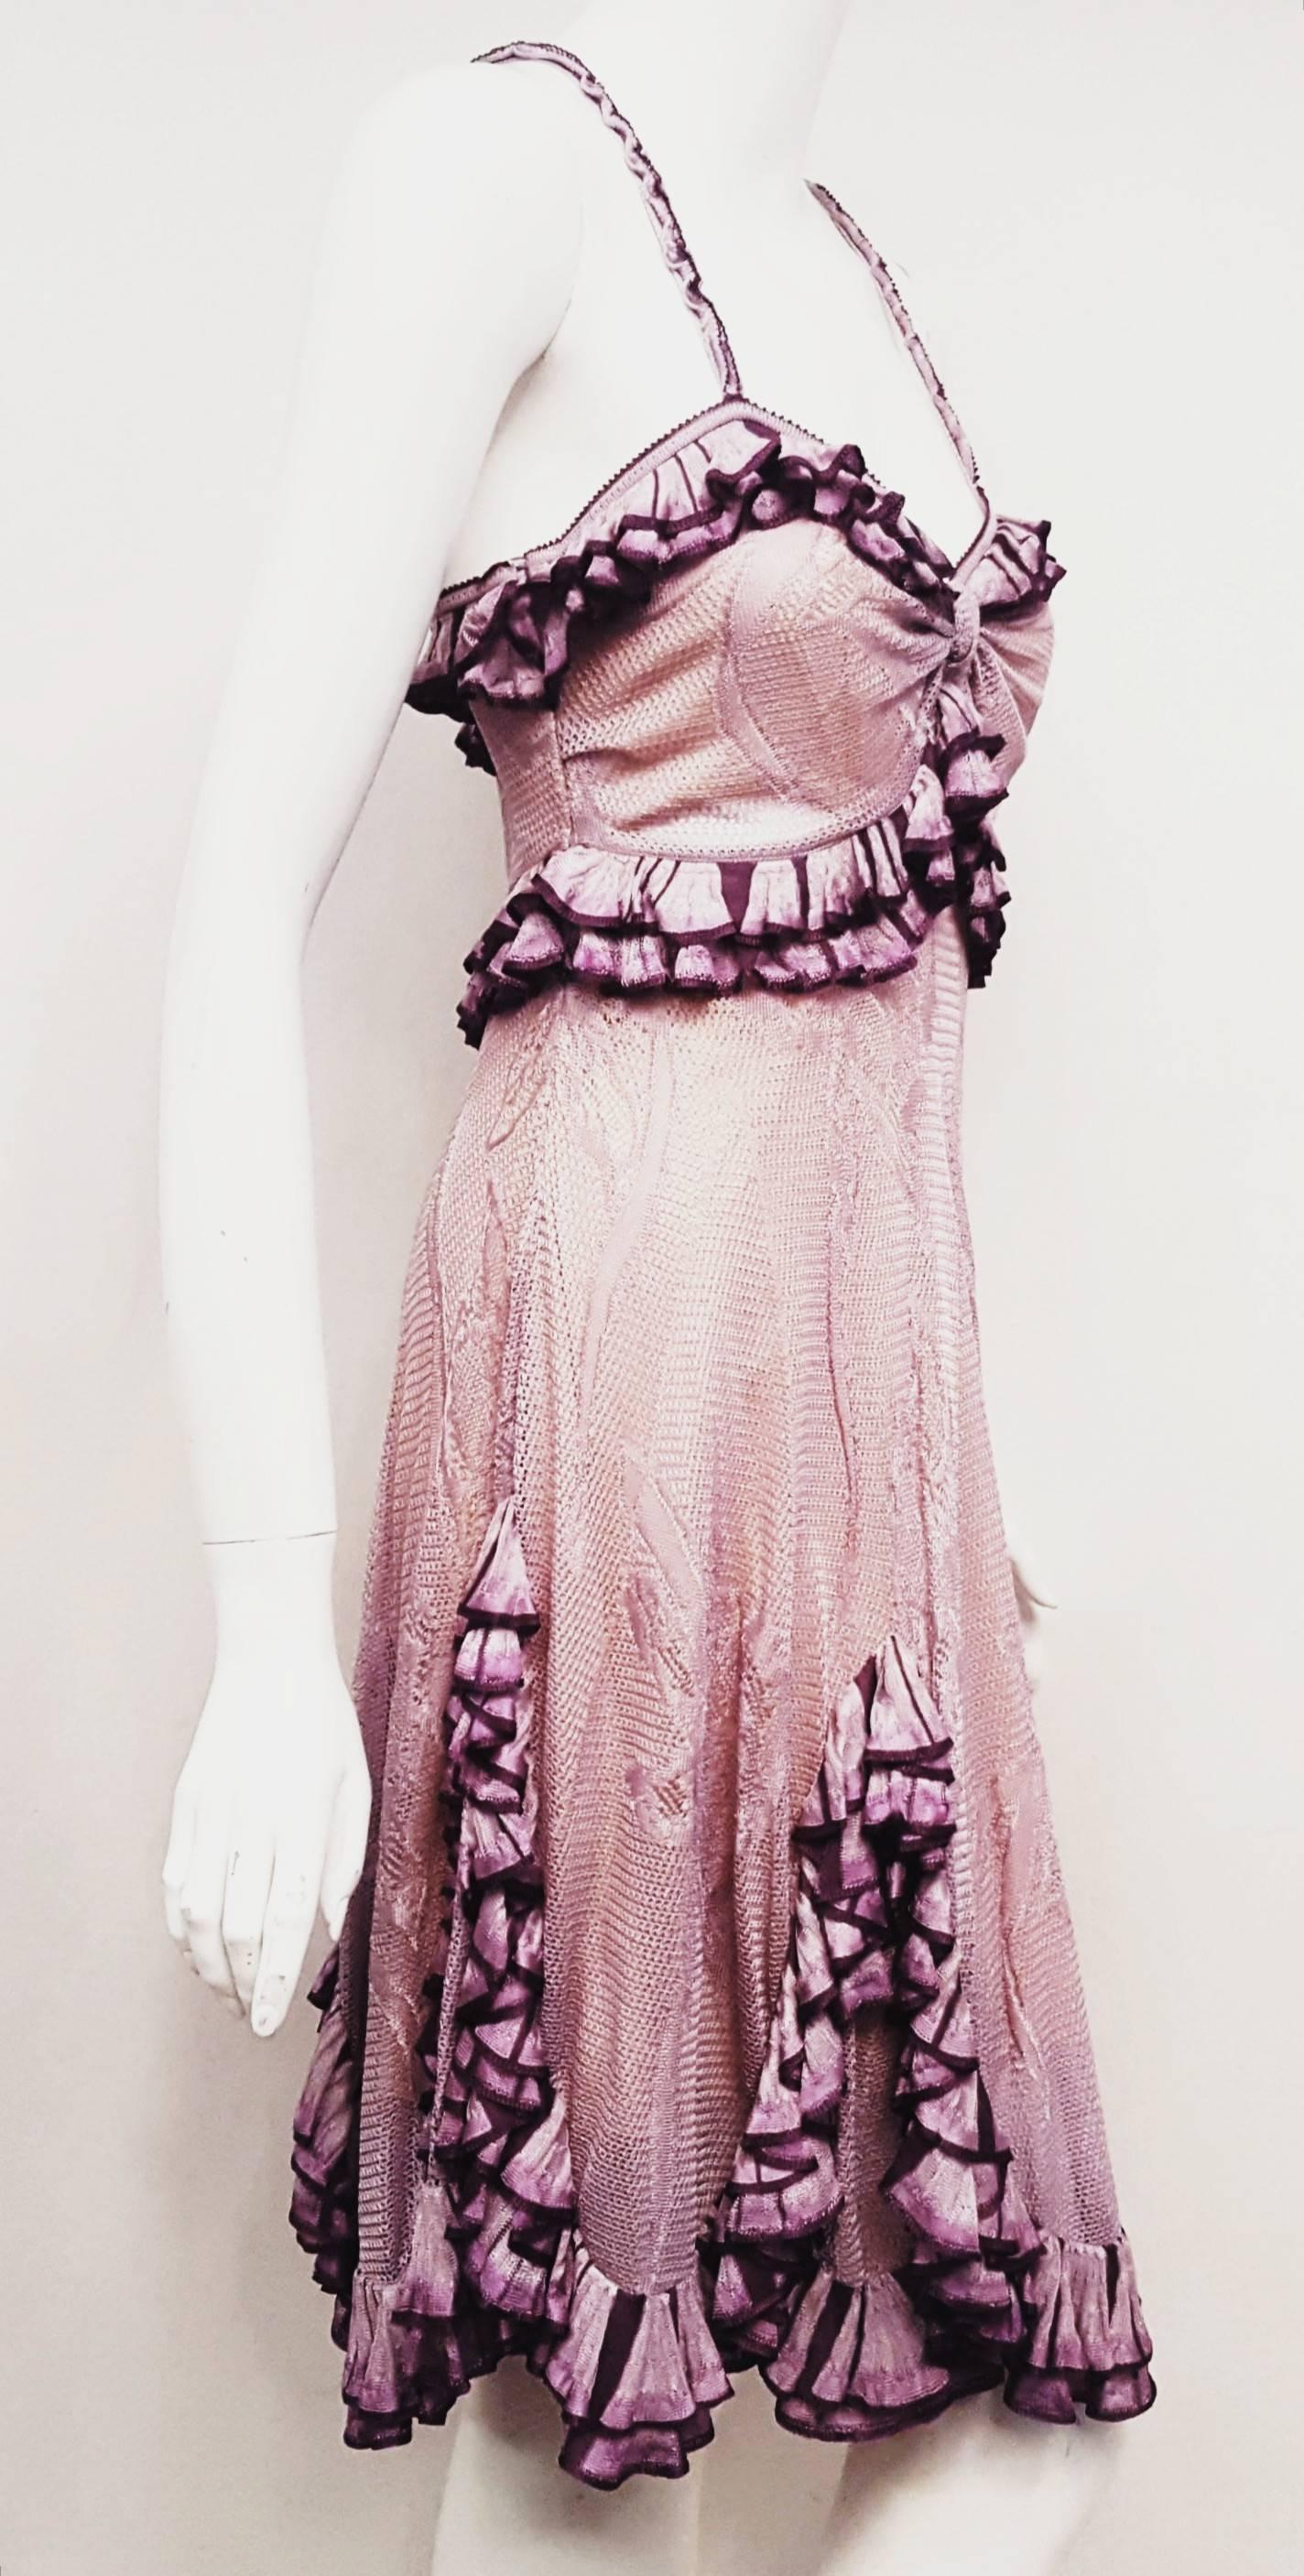 Christian Dior dress was designed by John Galliano for the 2010/2011 collection, his last for this legendary house.  This lavender knit crochet lace dress features empire waist and ruffles highlighted in purple.  Concealed zip closure at the side. 